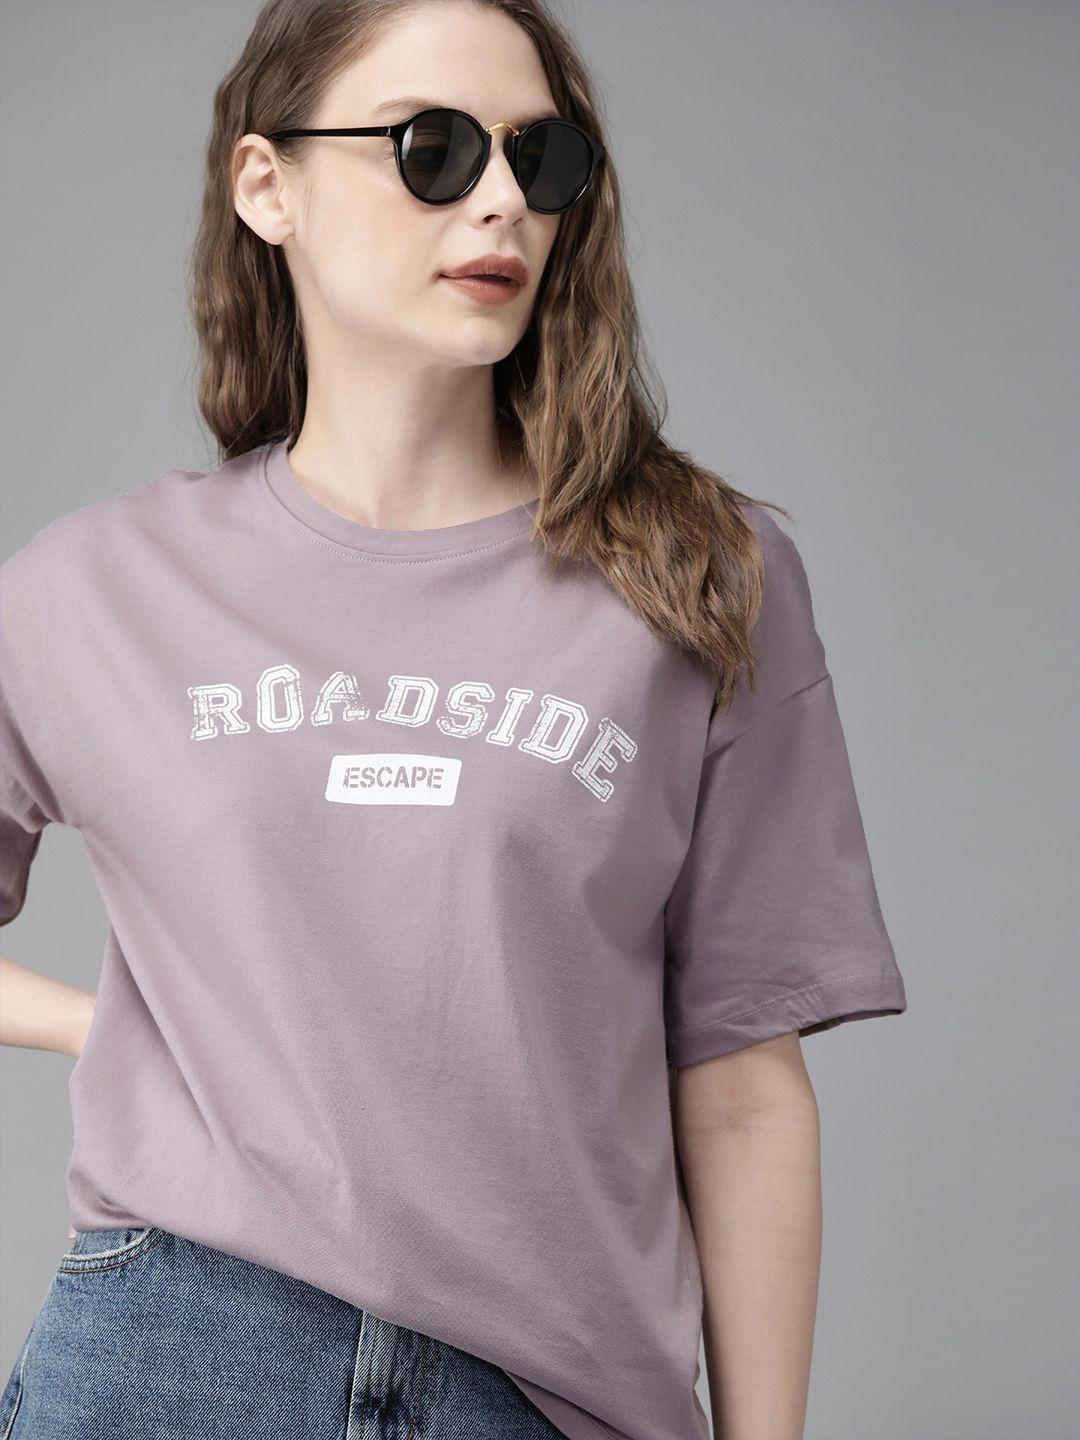 roadster-women-lavender-printed-boxy-round-neck-pure-cotton-t-shirt